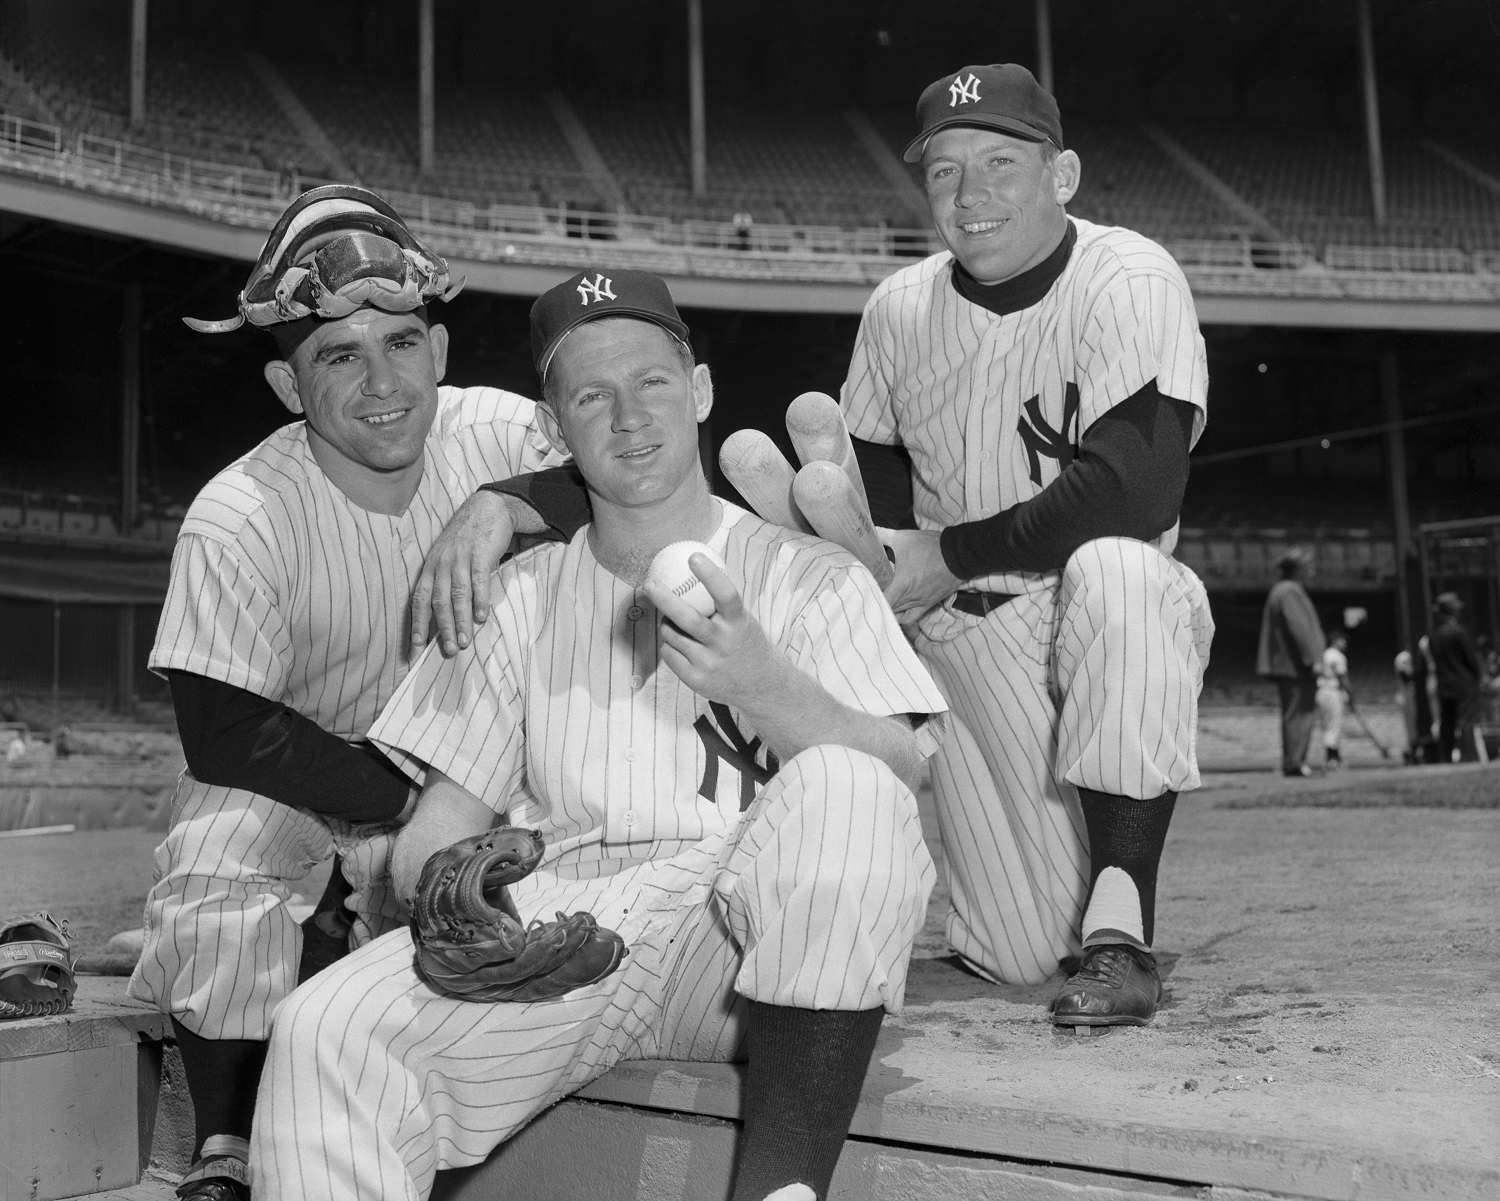 Yogi Berra; Whitey Ford, and Mickey Mantle were fixtures on some great New York Yankees teams. | Herb Scharfman/Getty Images